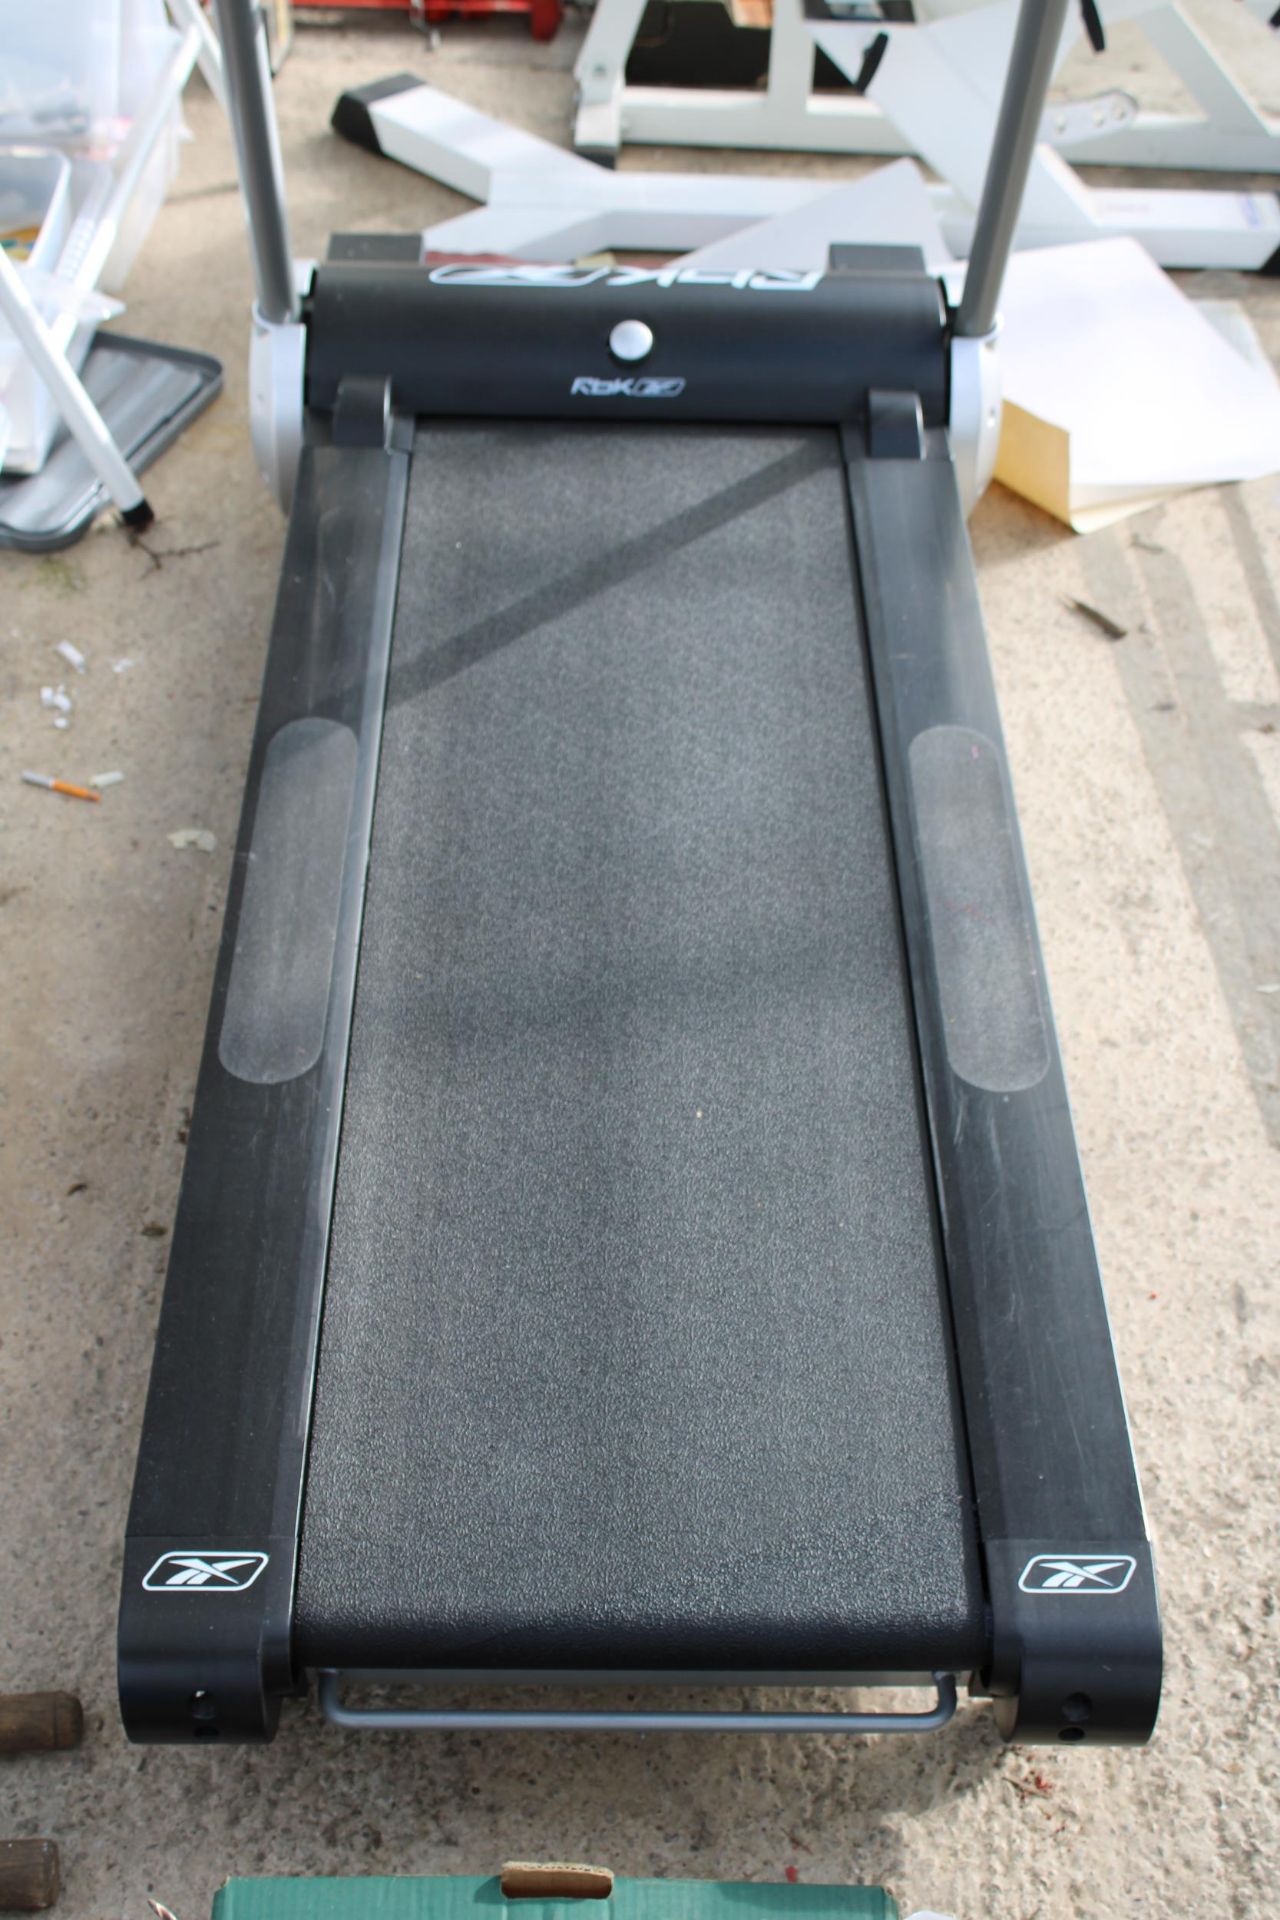 A REEBOK TREADMILL RUNNING MACHINE WITH POWER LEAD AND MANUAL - Image 3 of 3